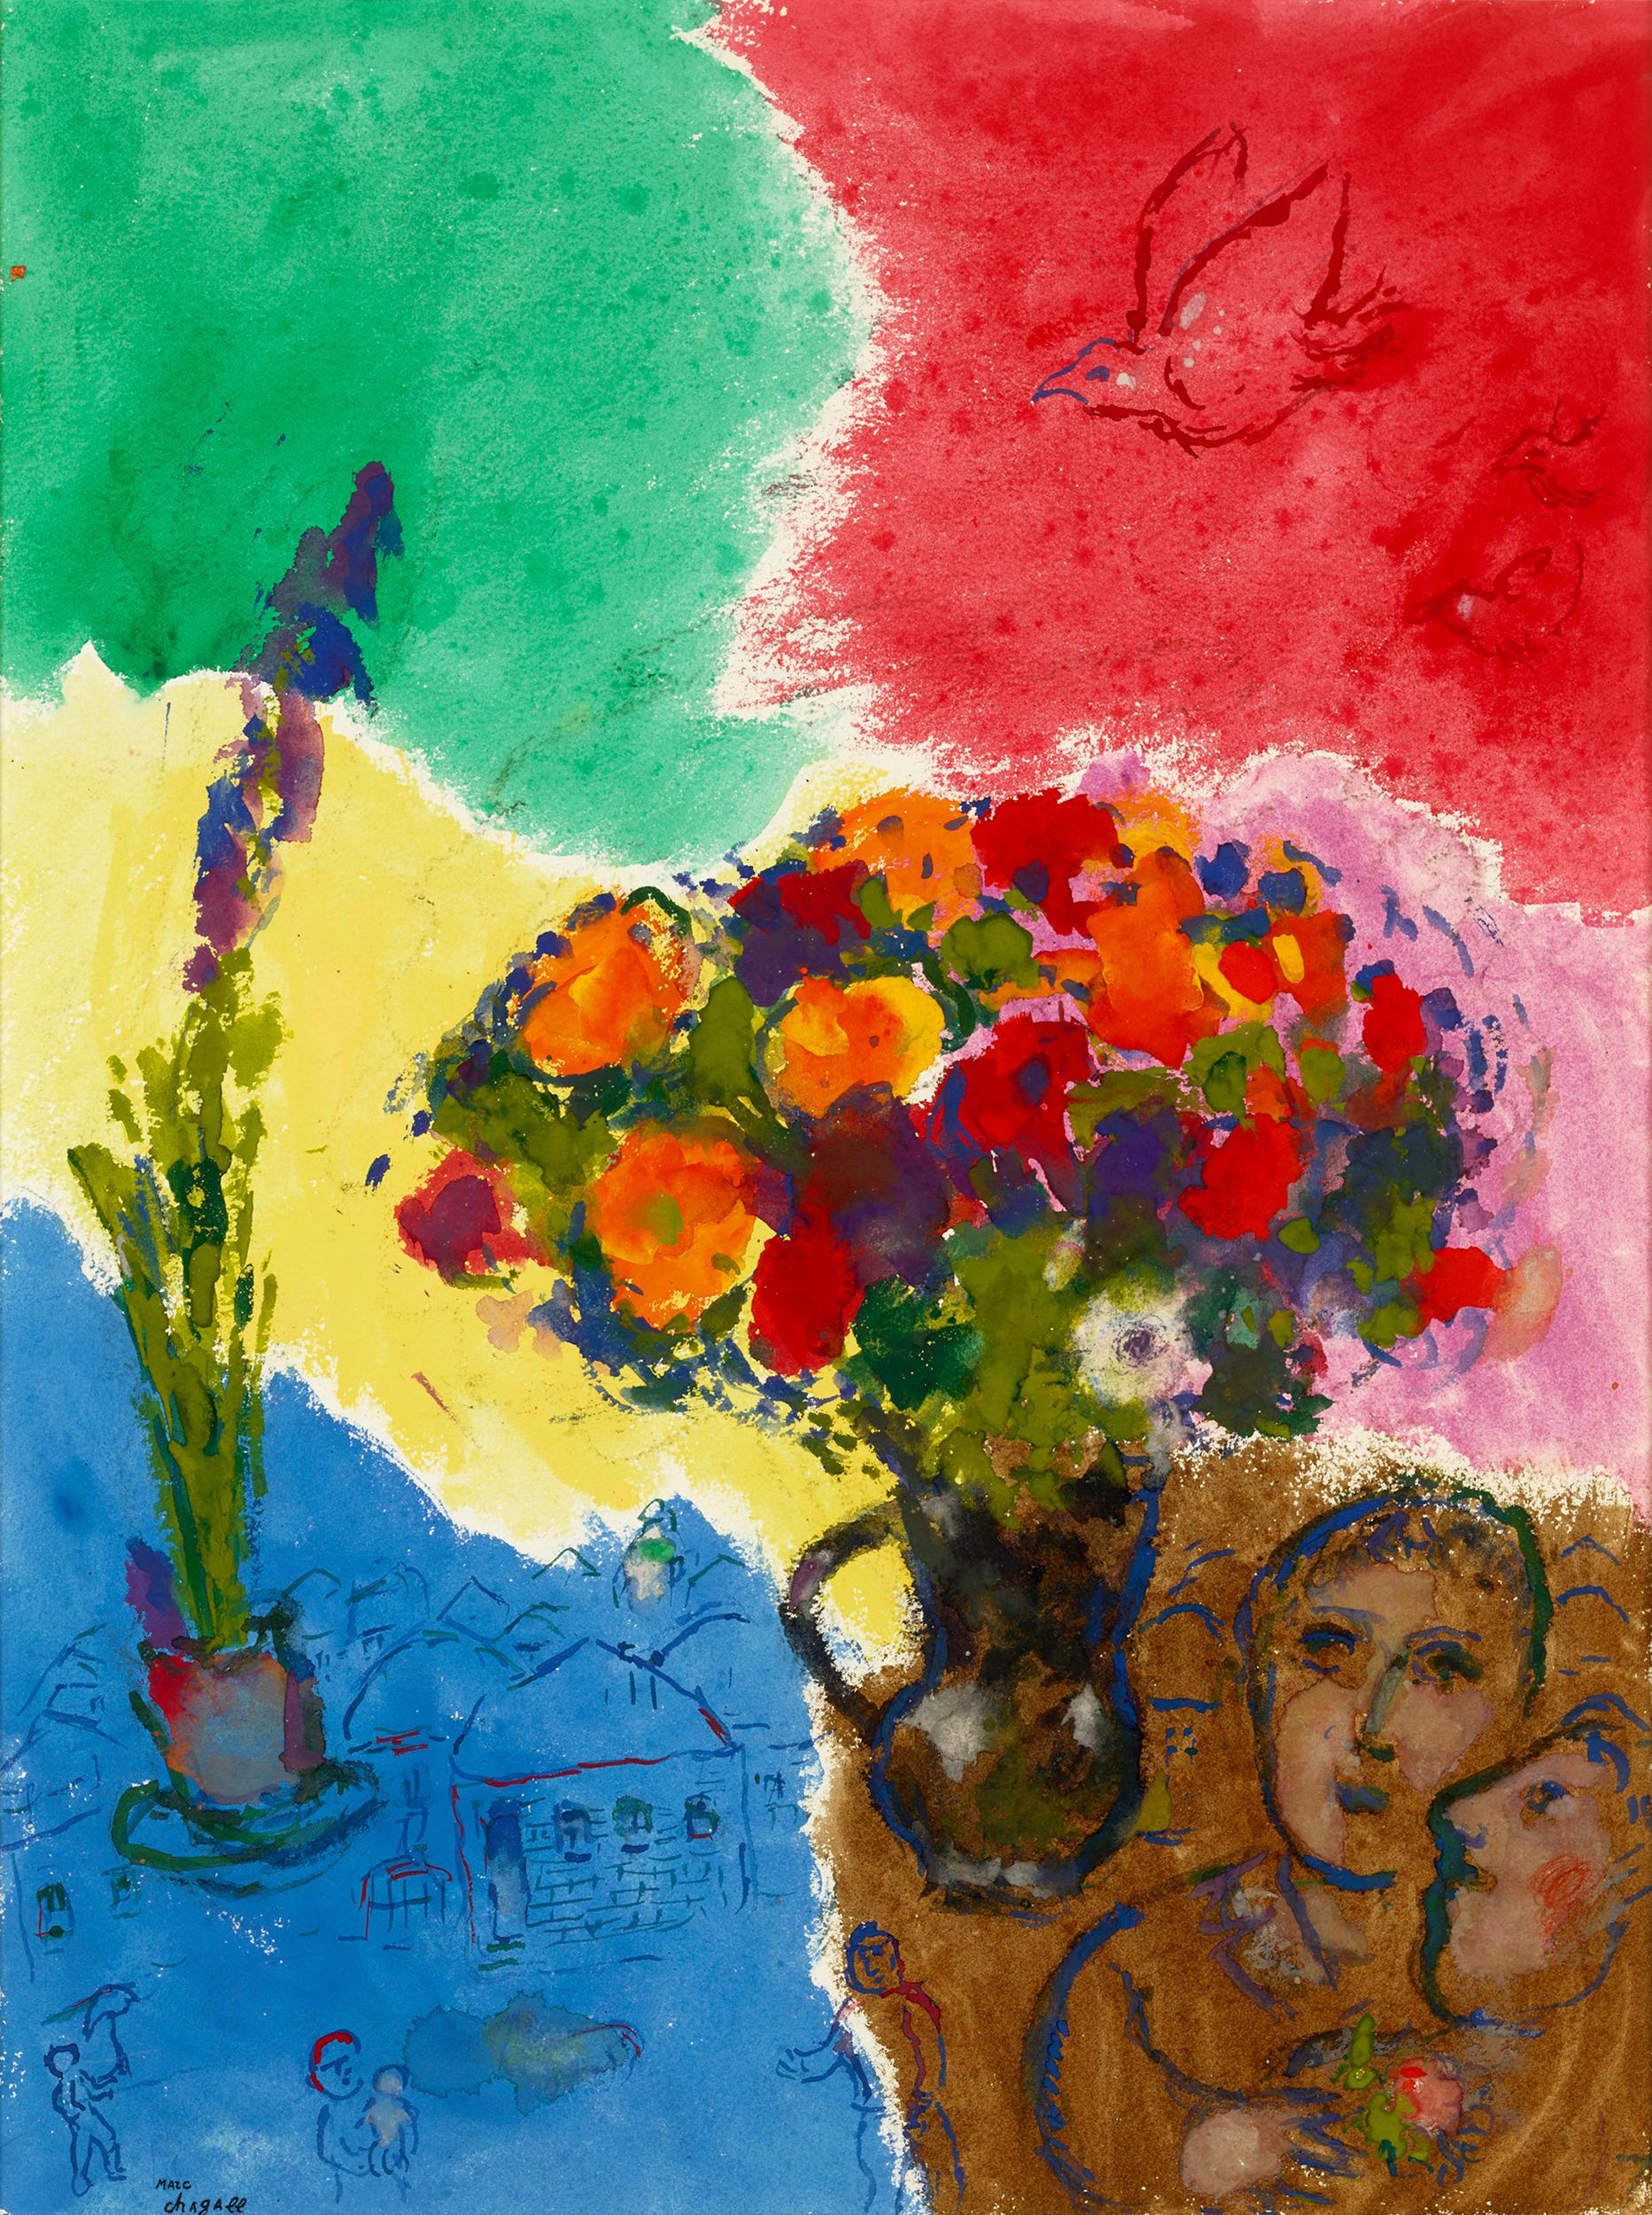 What inspired Marc Chagall?